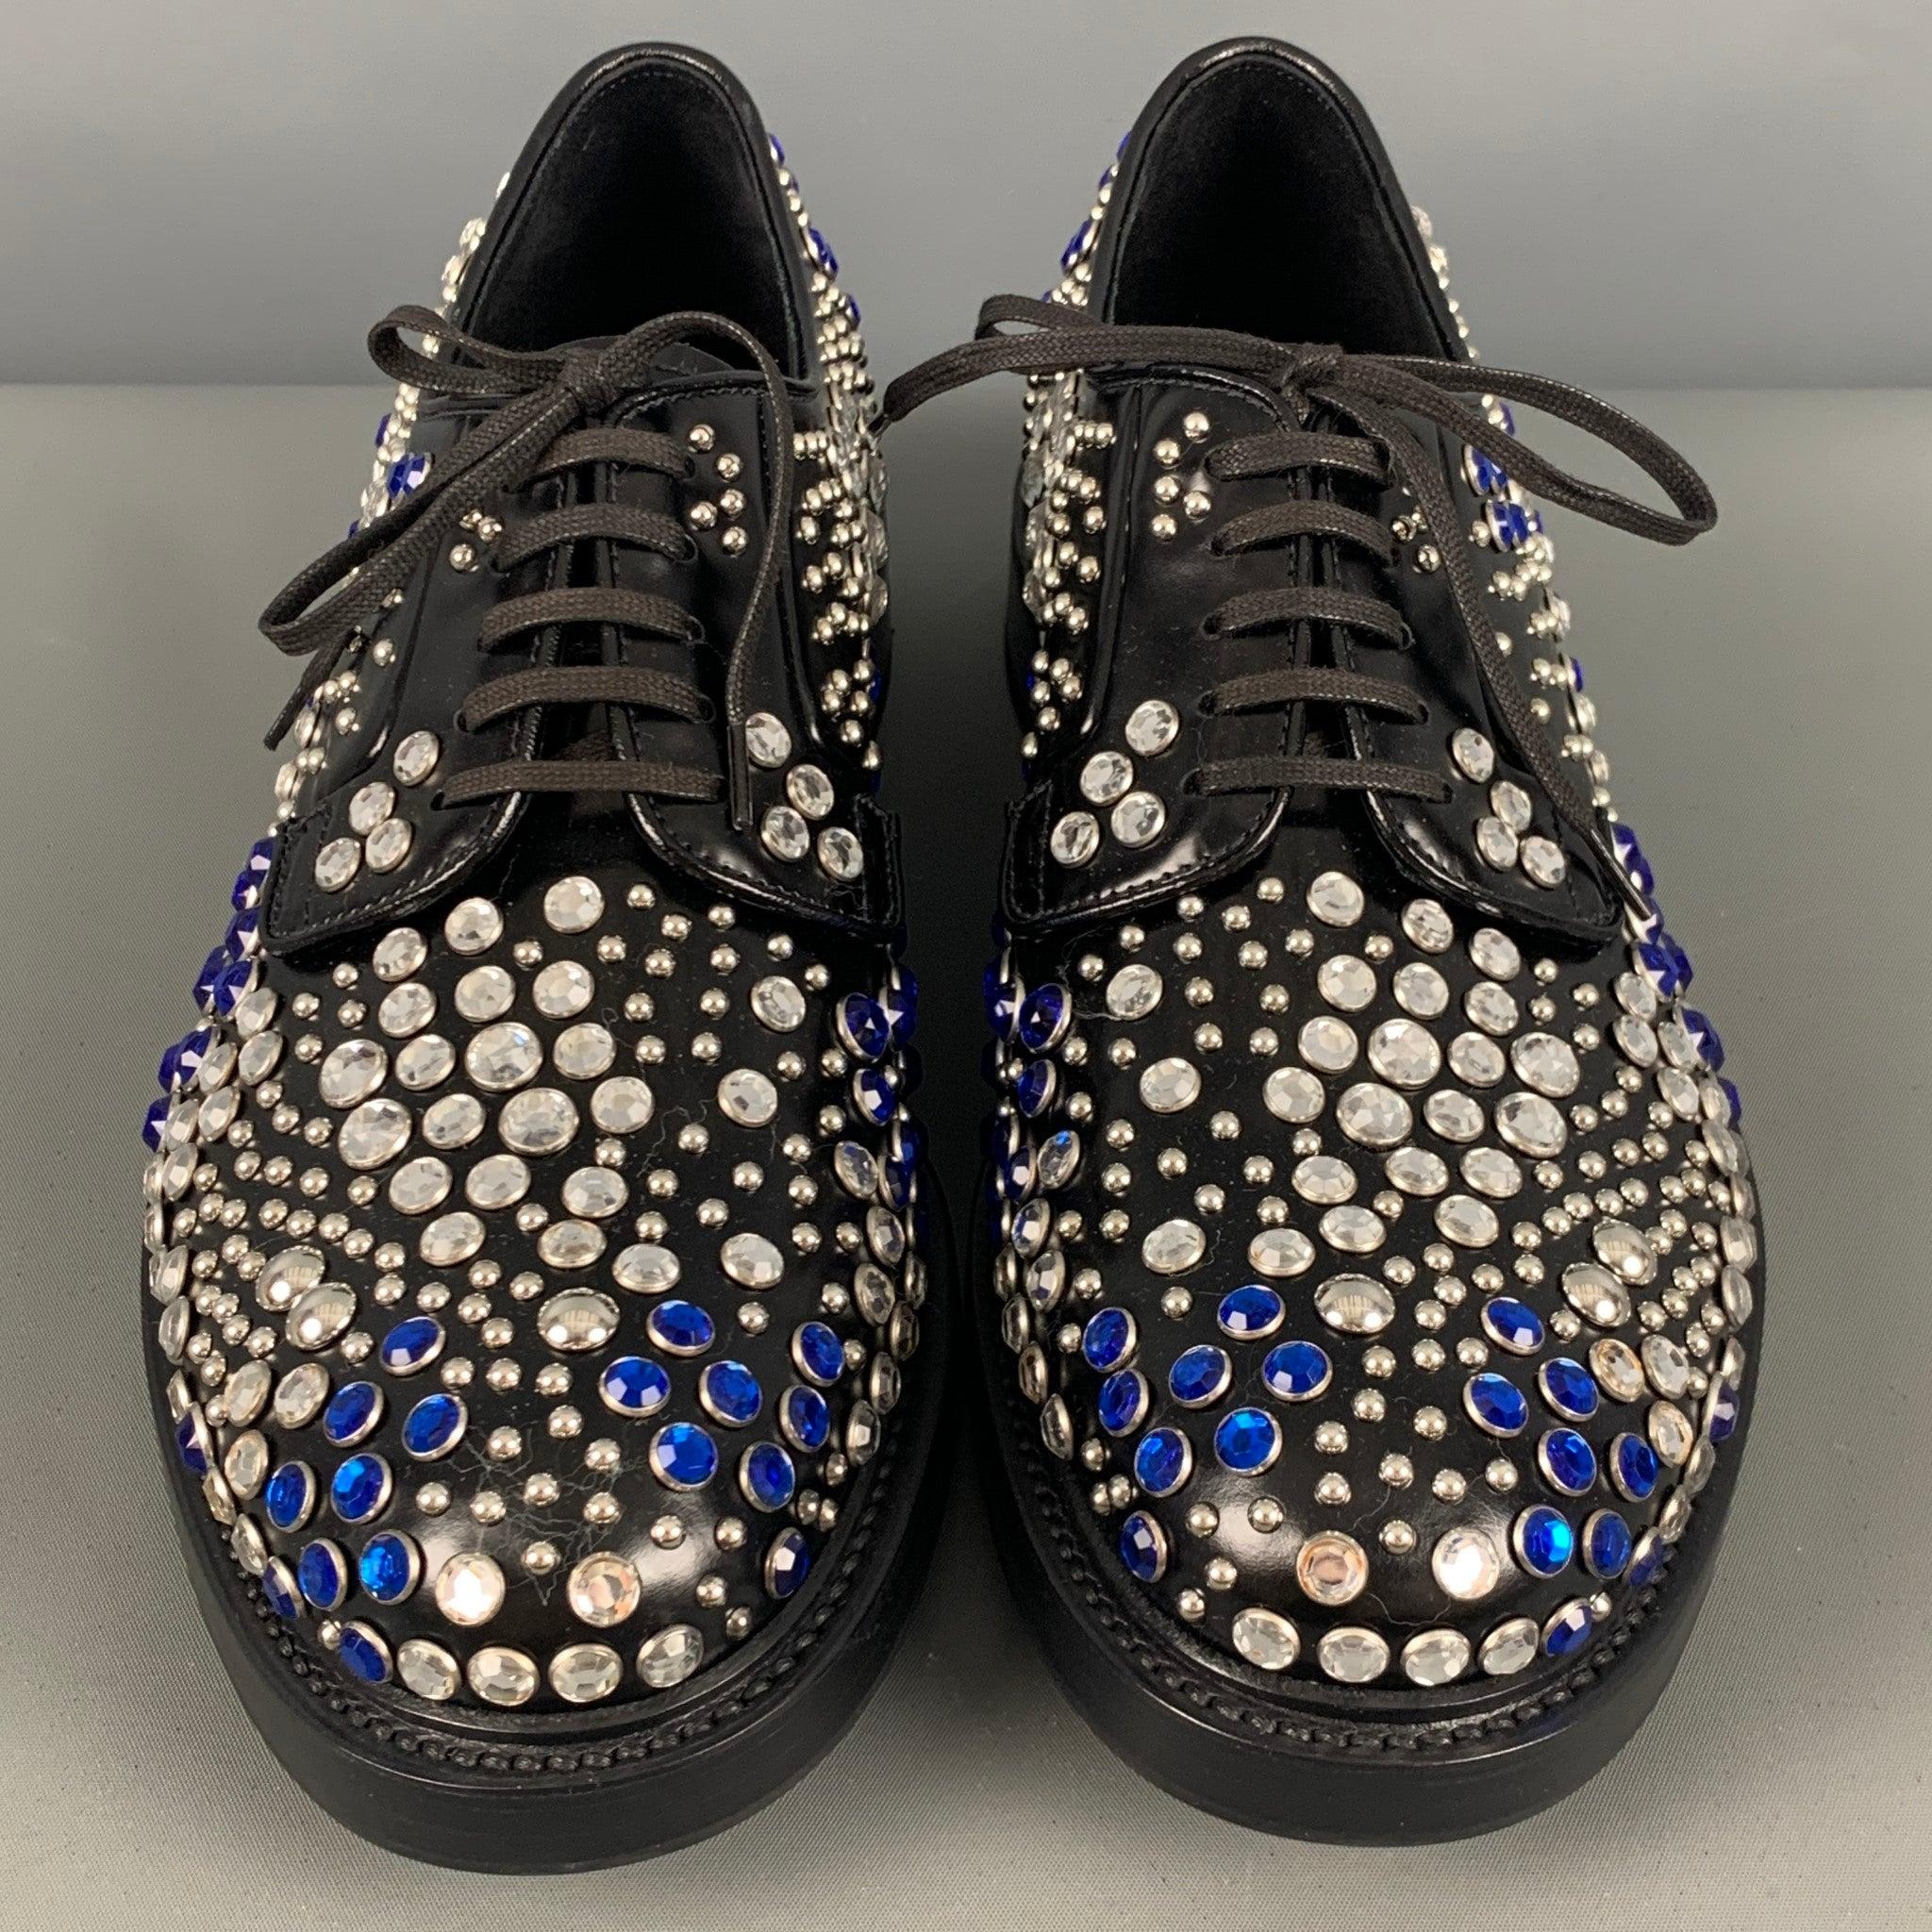 Men's PRADA Size 9 Black Silver & Blue Studded Leather Lace Up Shoes For Sale